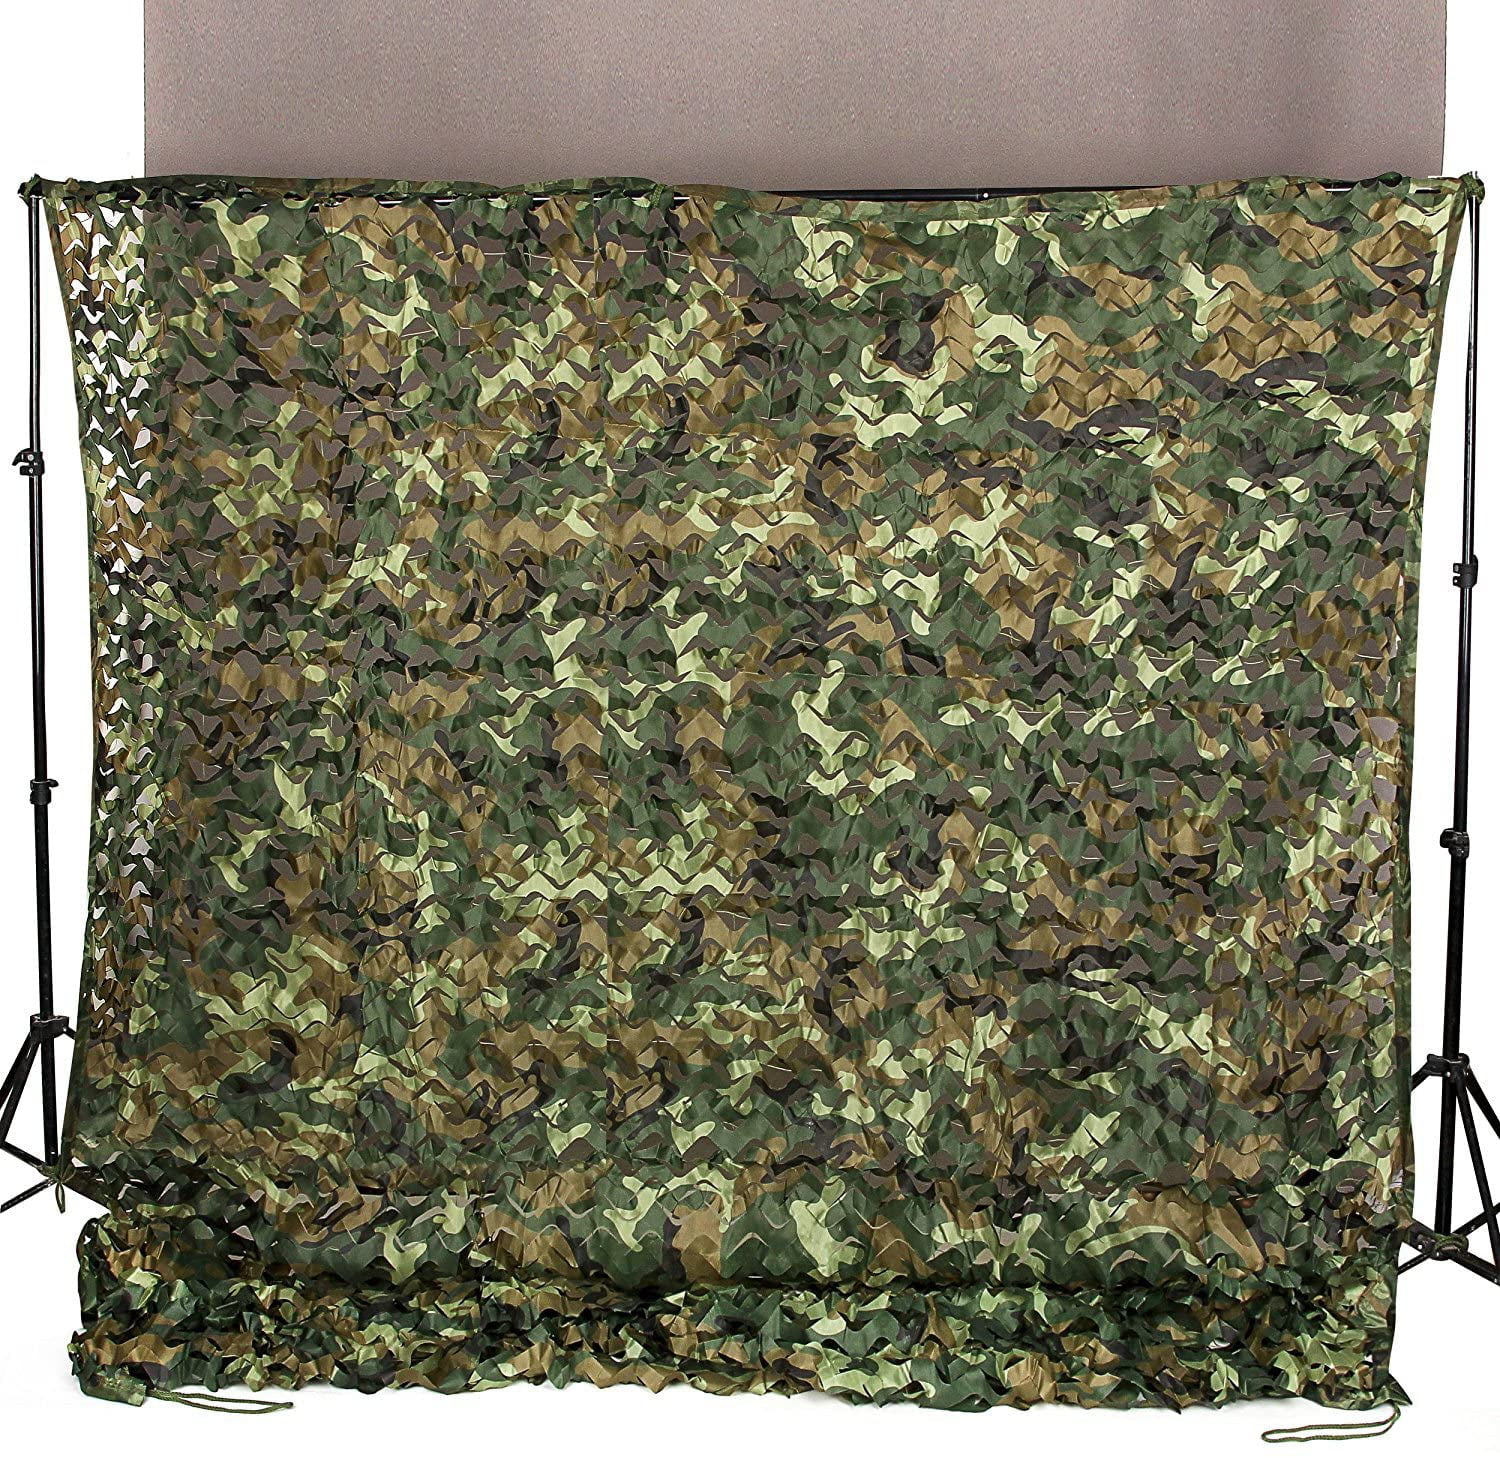 Desert Camouflage Woodland Military Net Camo Nets Hunting Campings Tent Cover US 